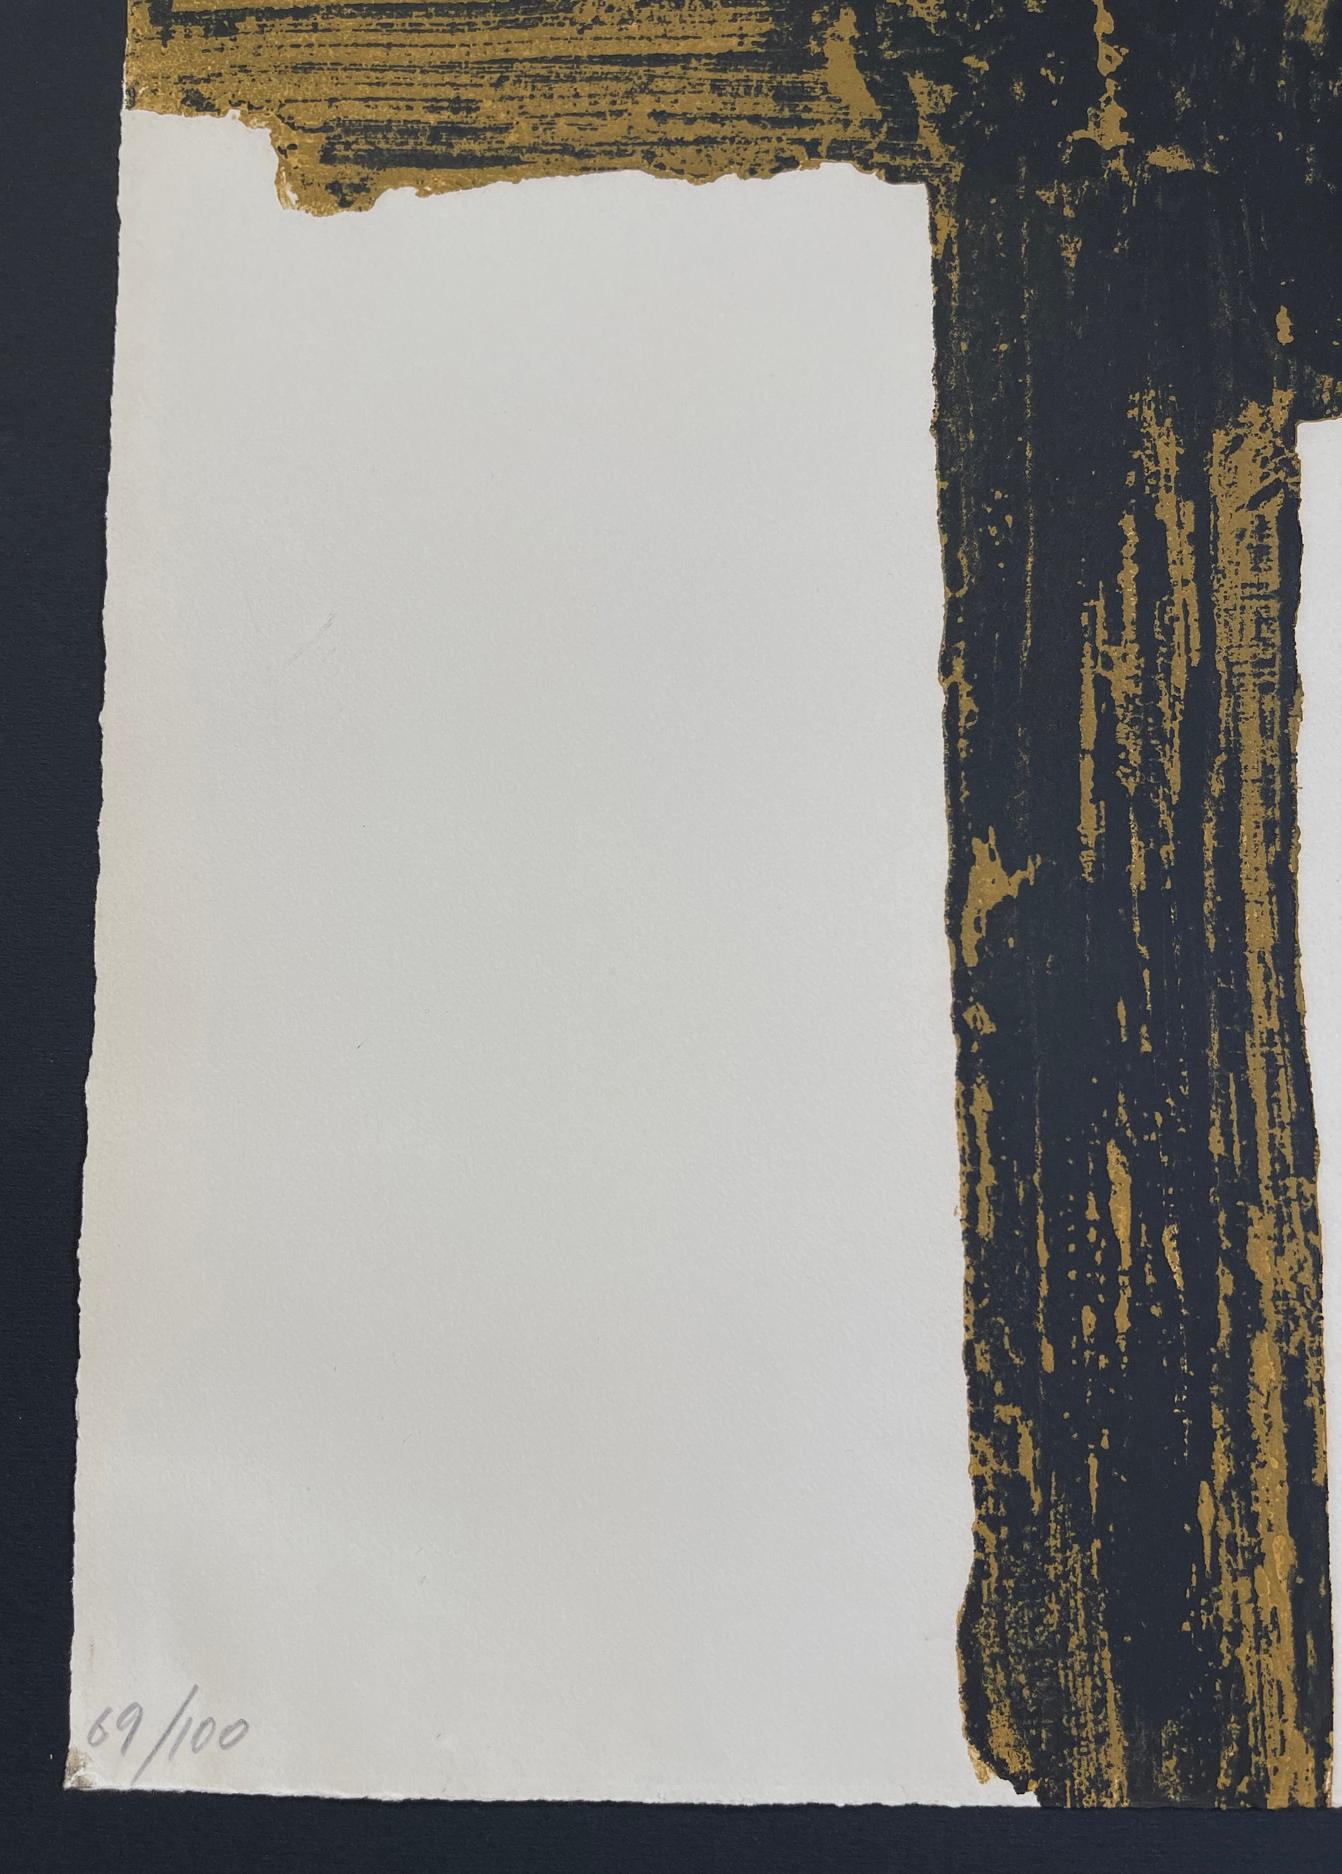 Eau Forte XVIII, 1962, Etching, Limited Edition of 100 by Pierre Soulages -BNF19 For Sale 2